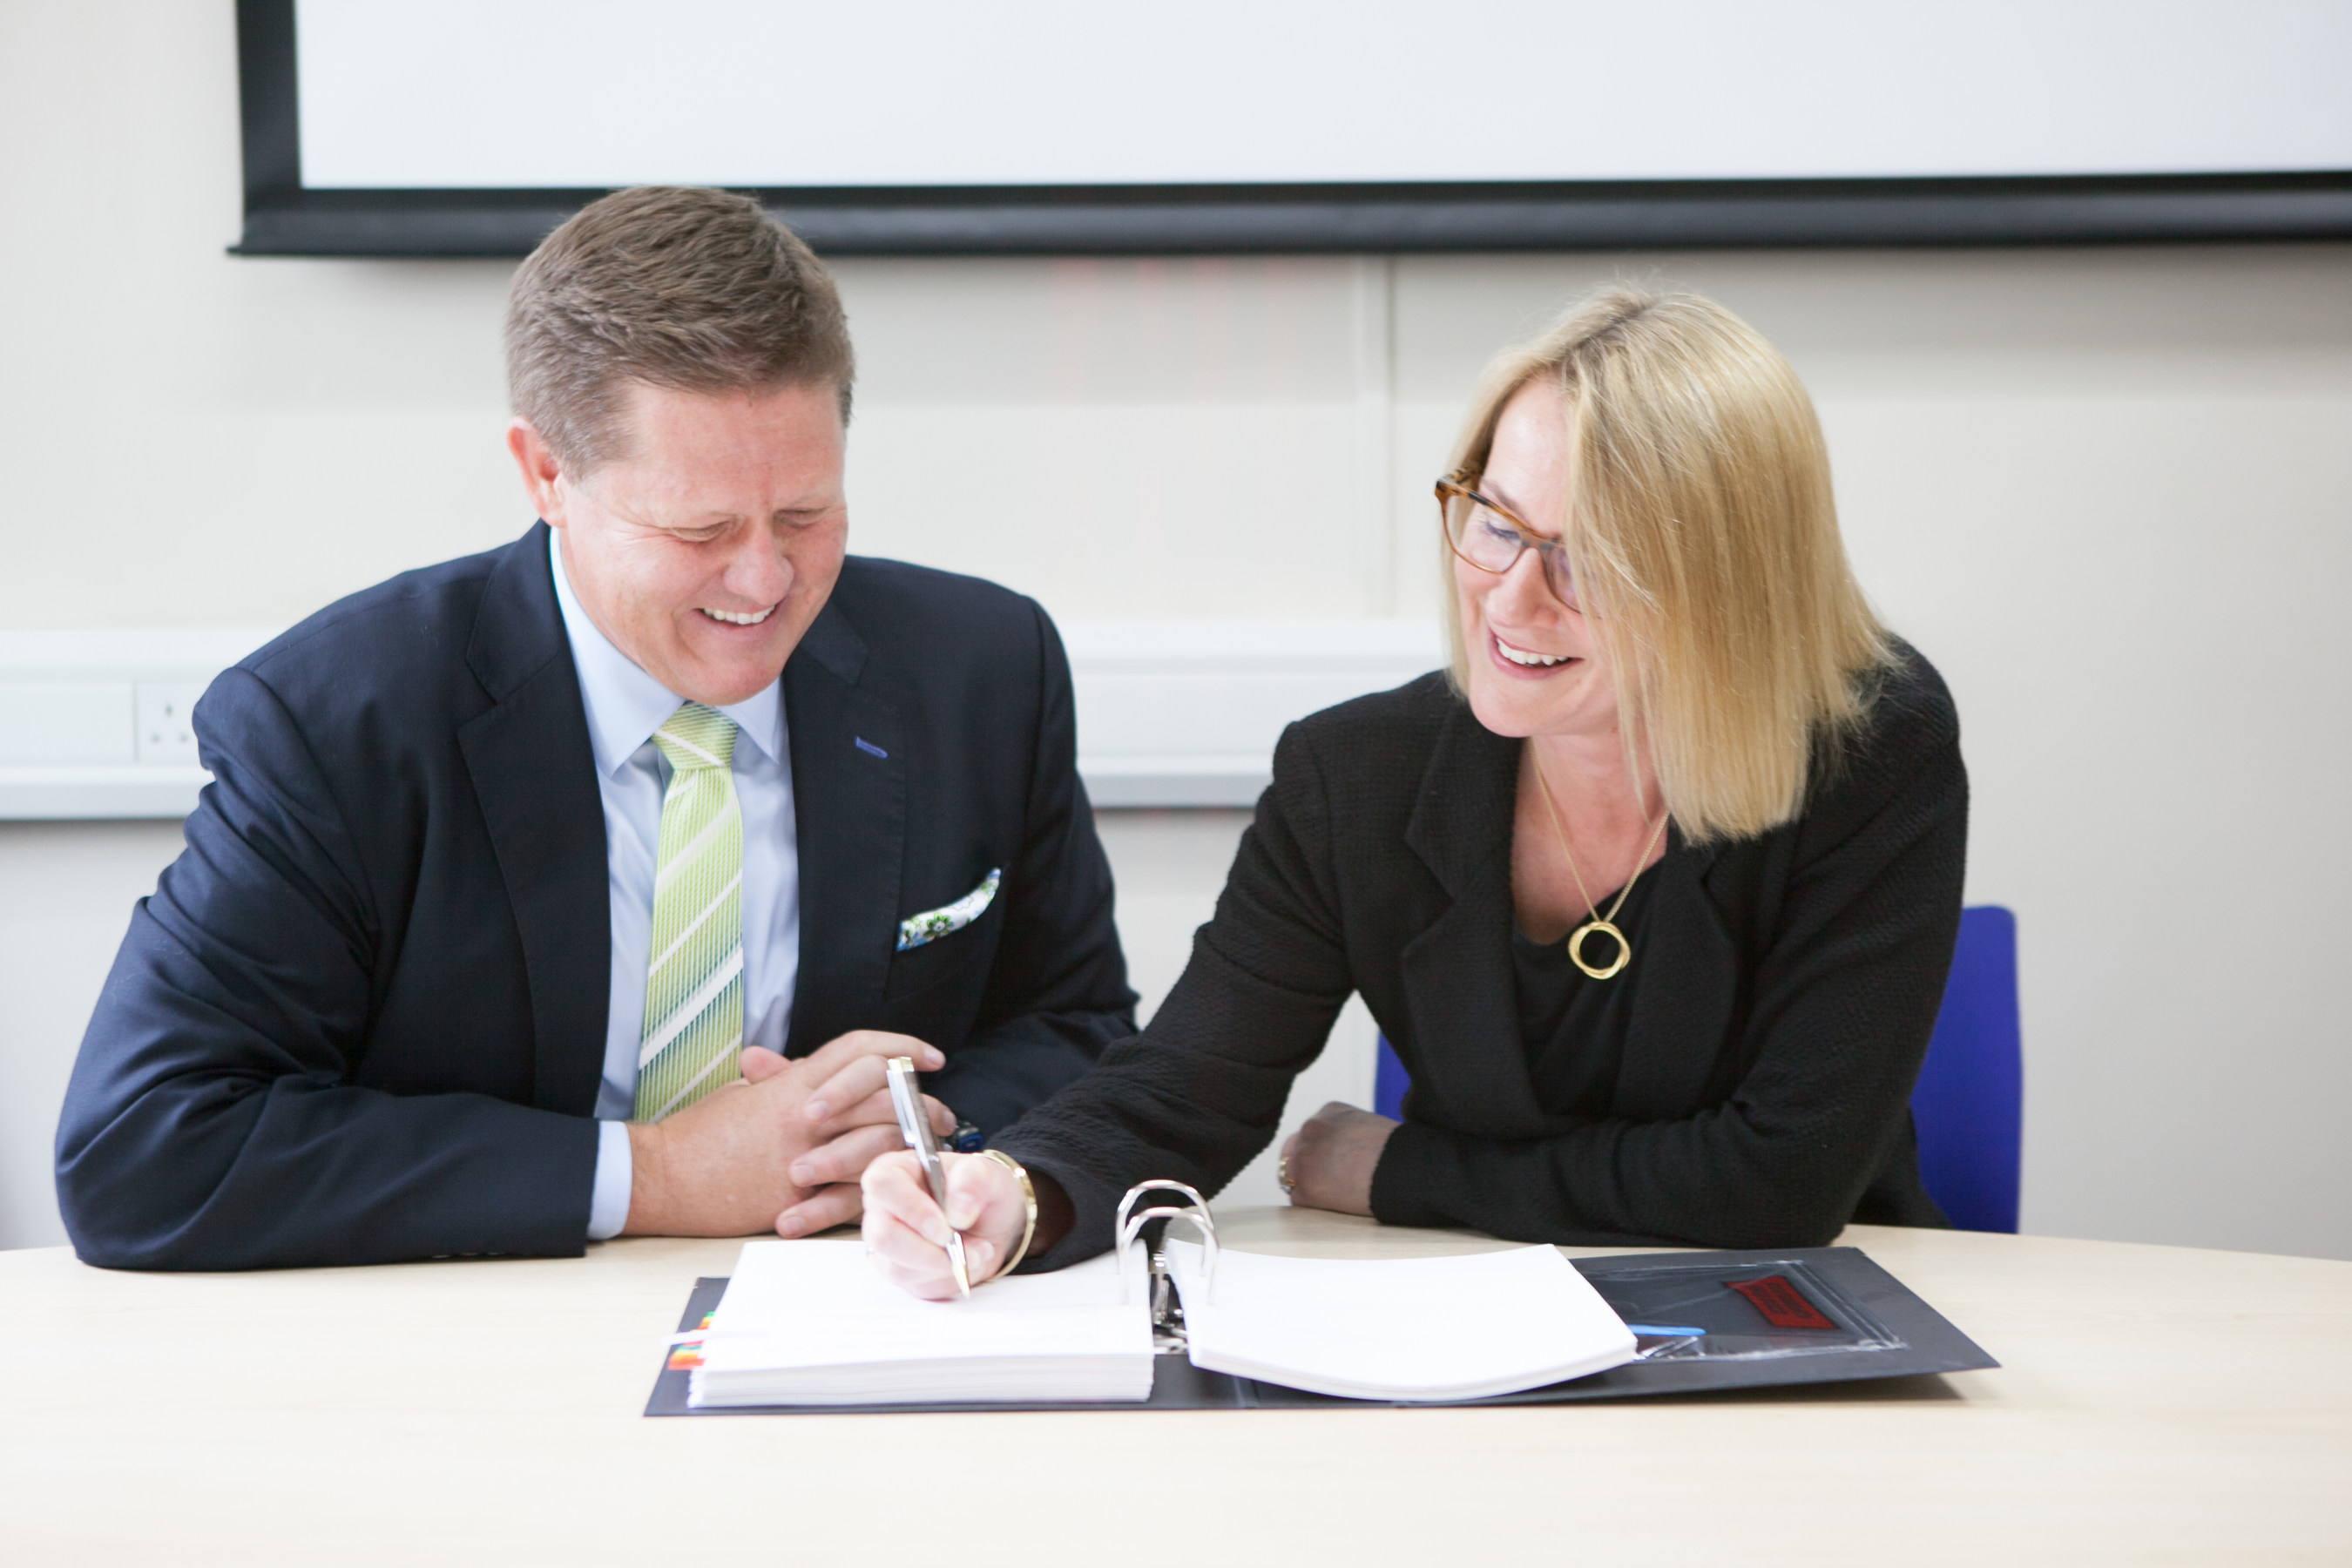 Matthew Hawkins, president of Sunquest Information Systems, signs the contract with Dr. Tracey Batten, chief executive officer of North West London Pathology Consortium.